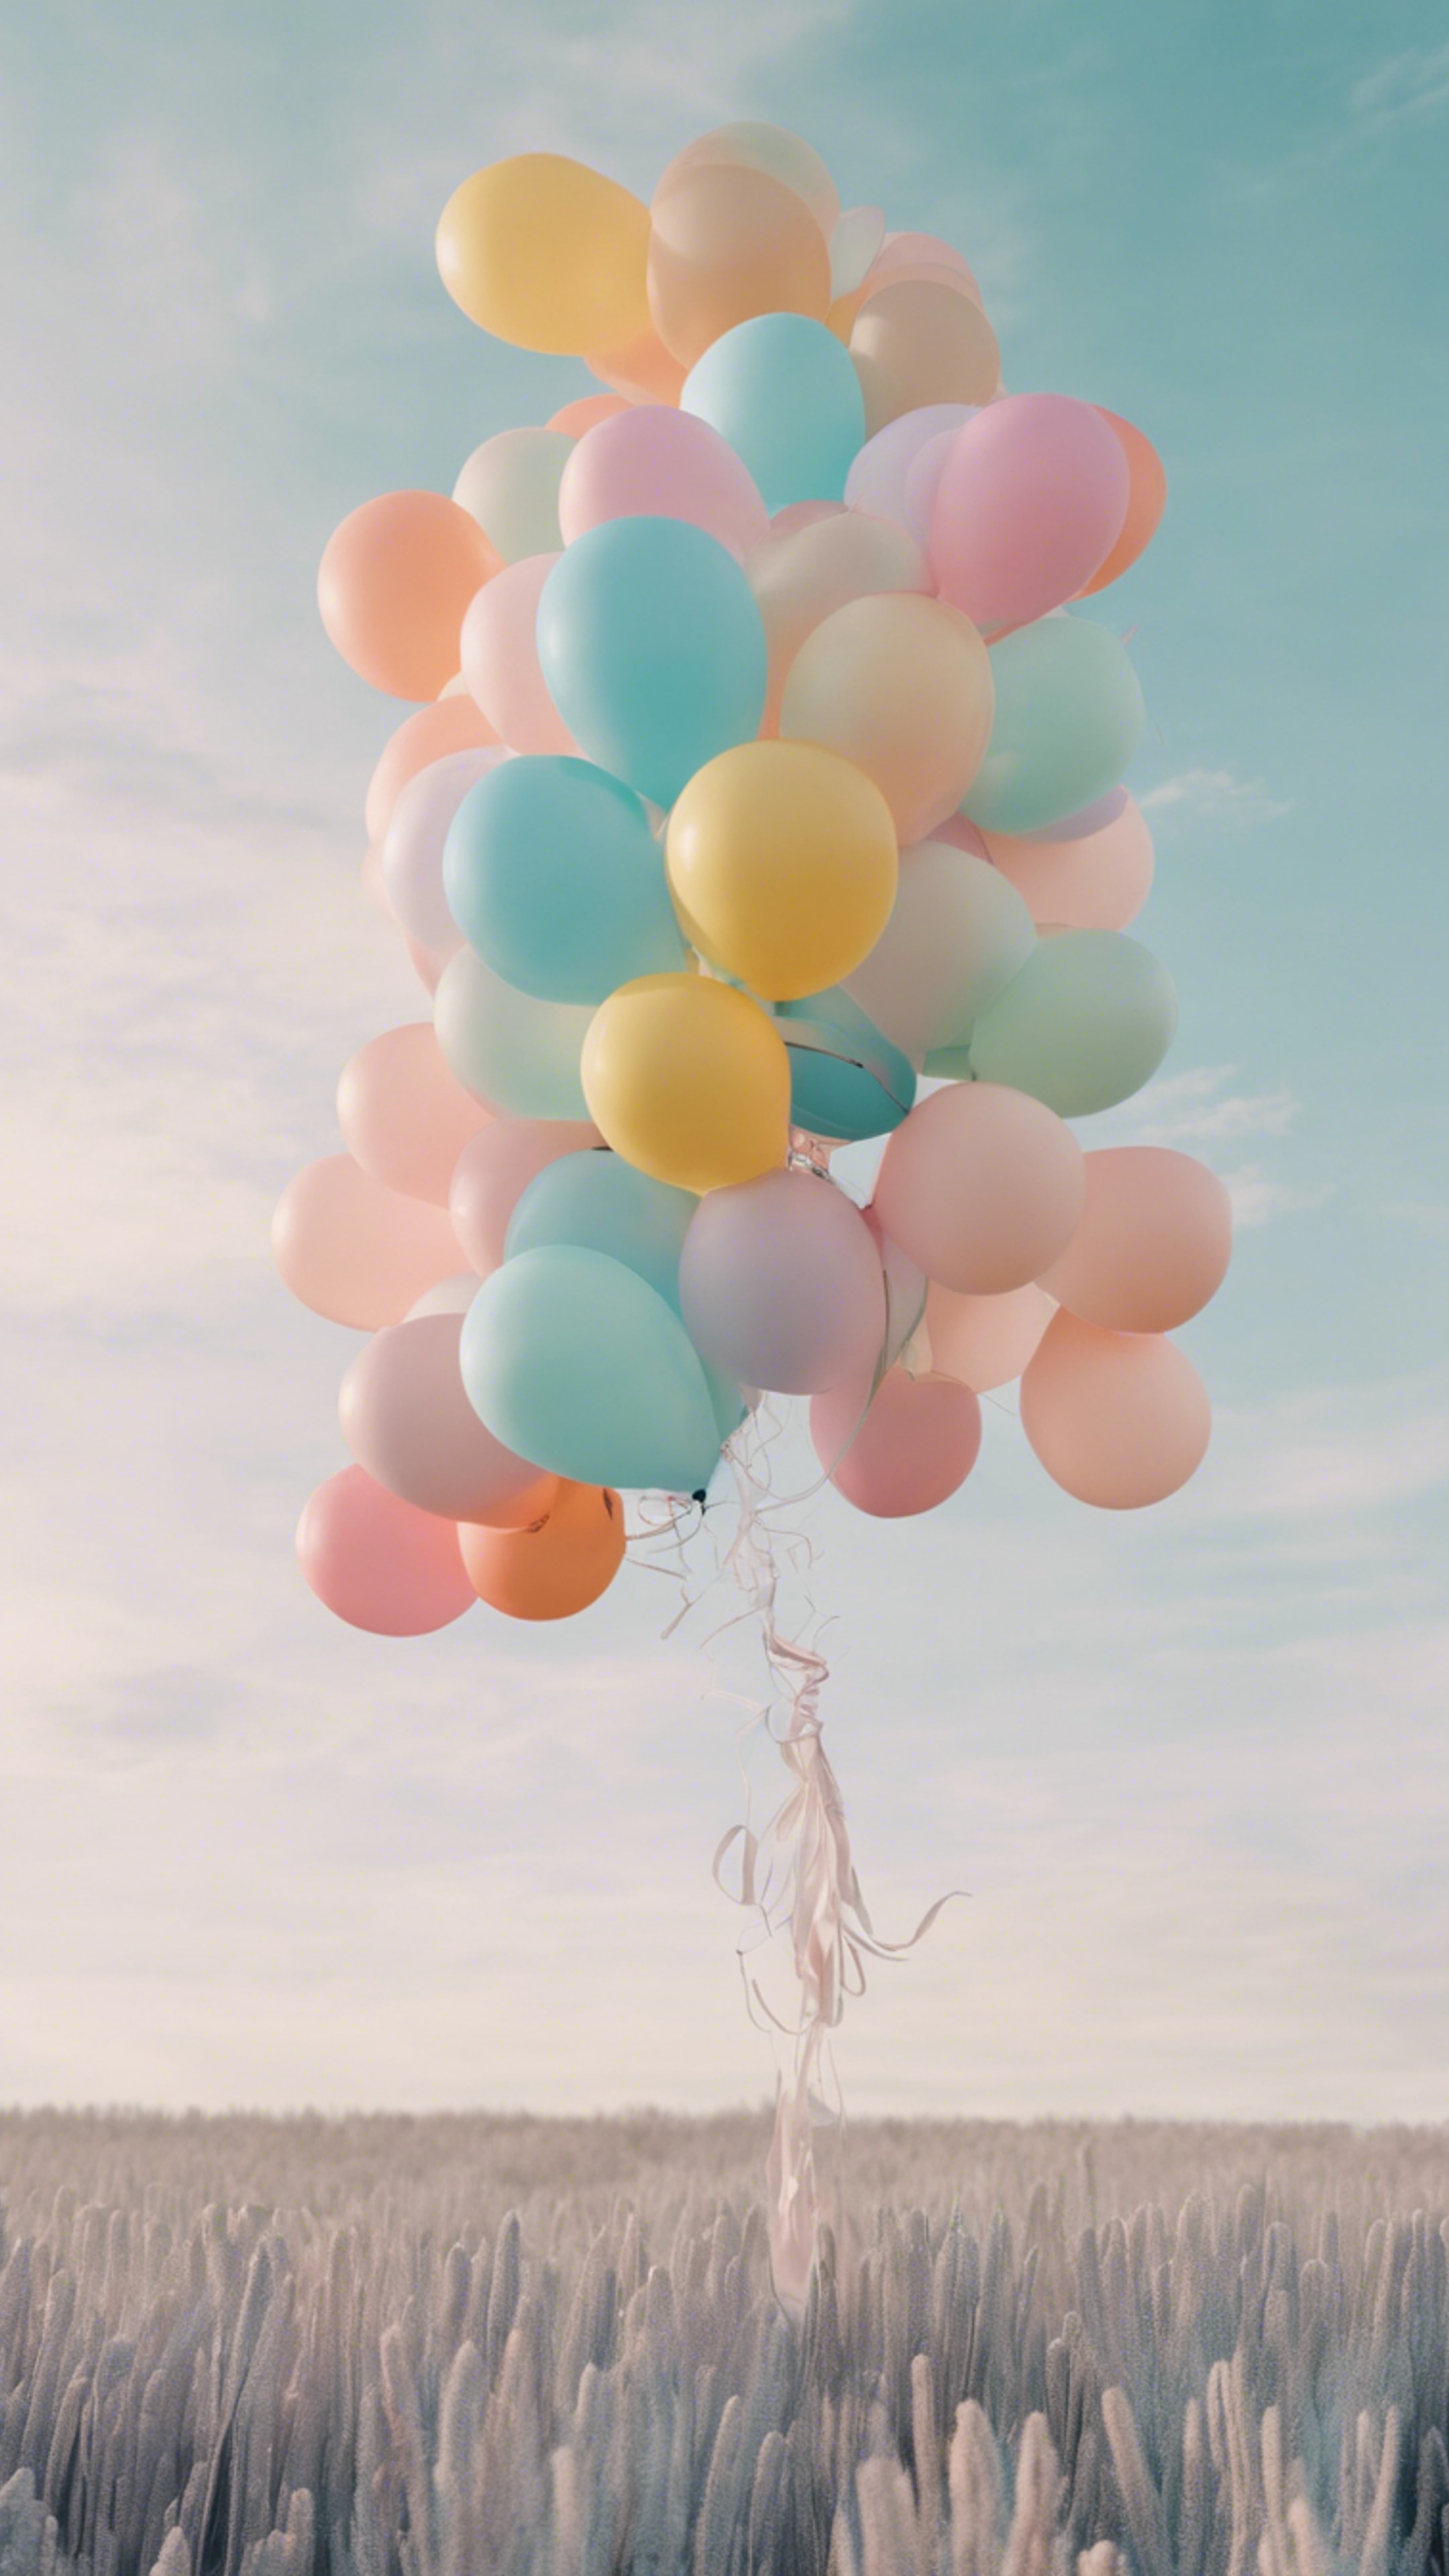 A cool pastel colored cluster of balloons floating in a clear sky. Kertas dinding[294975c578db48368ab8]